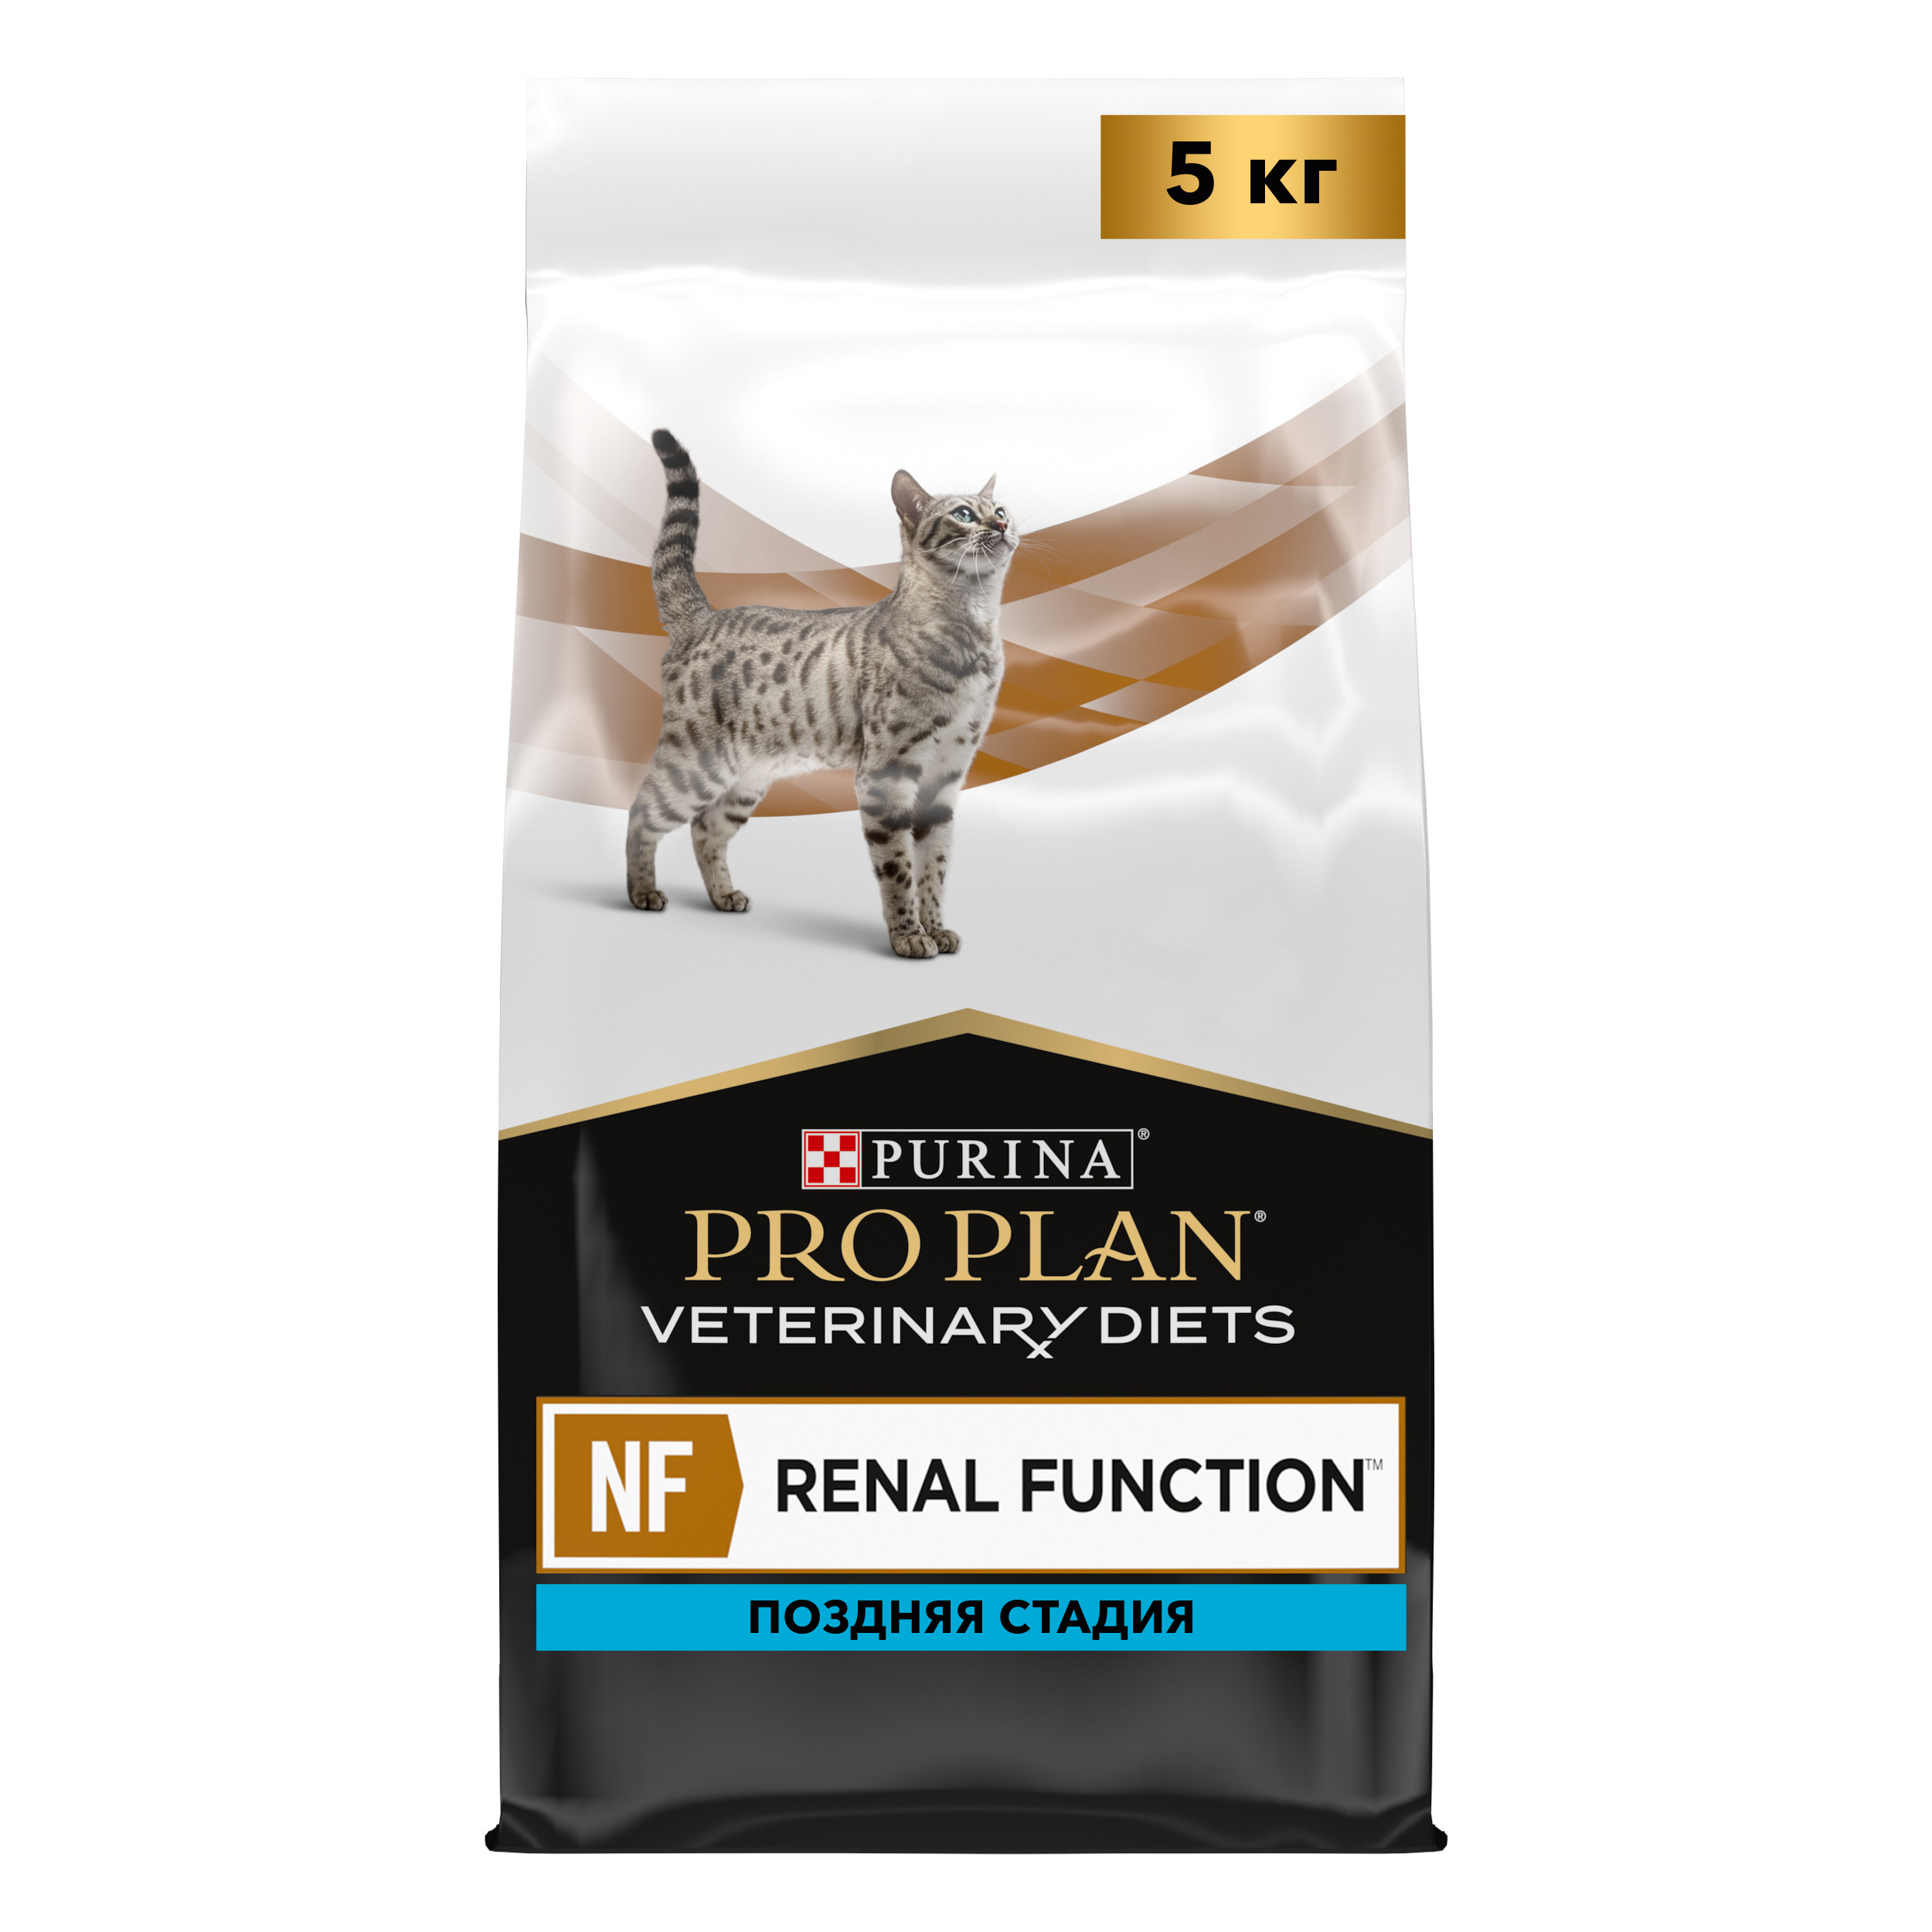 Purina Pro Plan renal function Advanced Care. Pro Plan vet renal NF early Care для кошек. Purina Pro Plan renal function для кошек. Pro Plan Veterinary Diets NF renal function. Pro plan renal nf для кошек